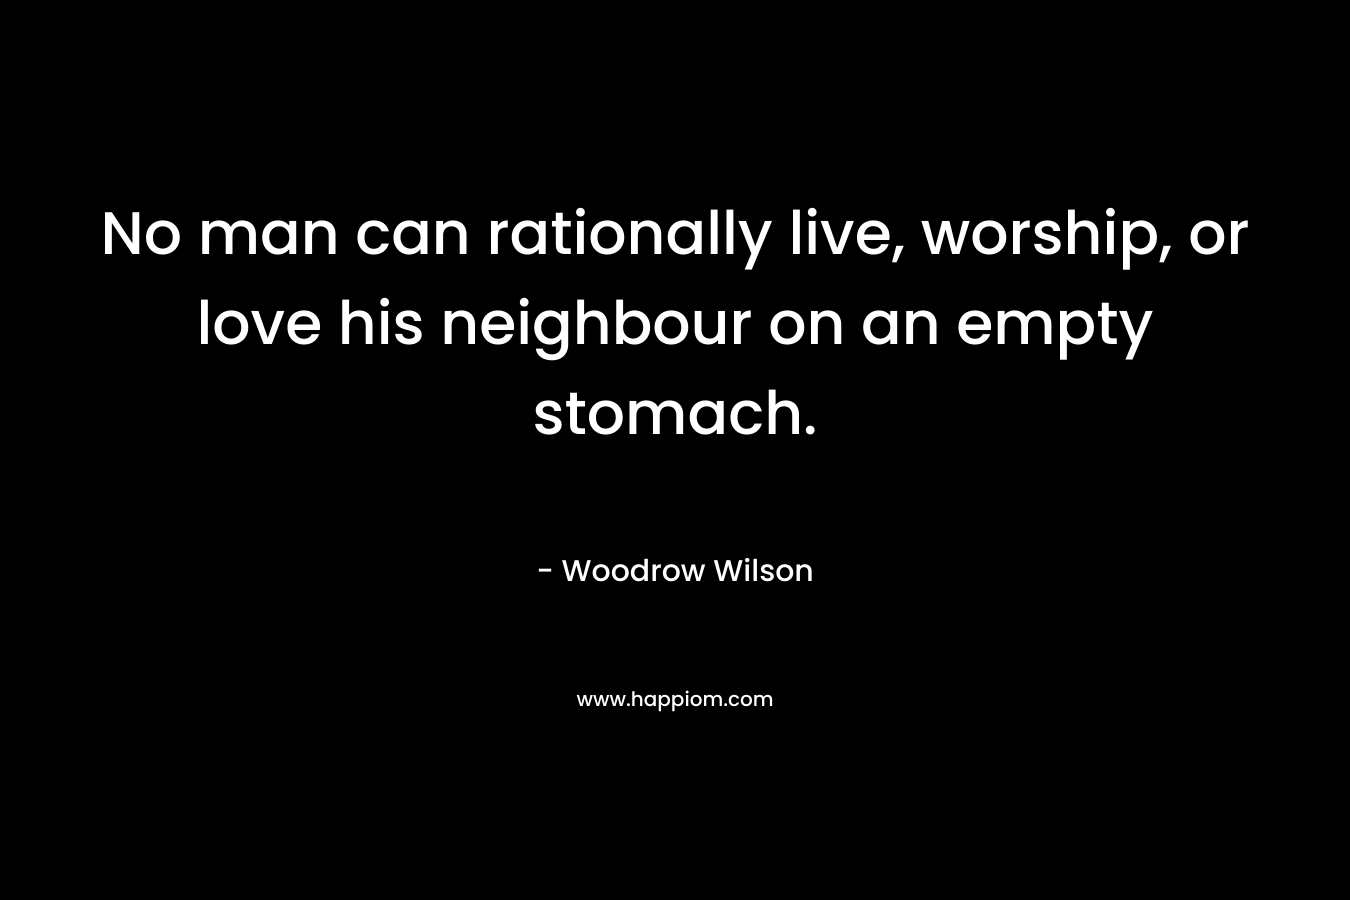 No man can rationally live, worship, or love his neighbour on an empty stomach.